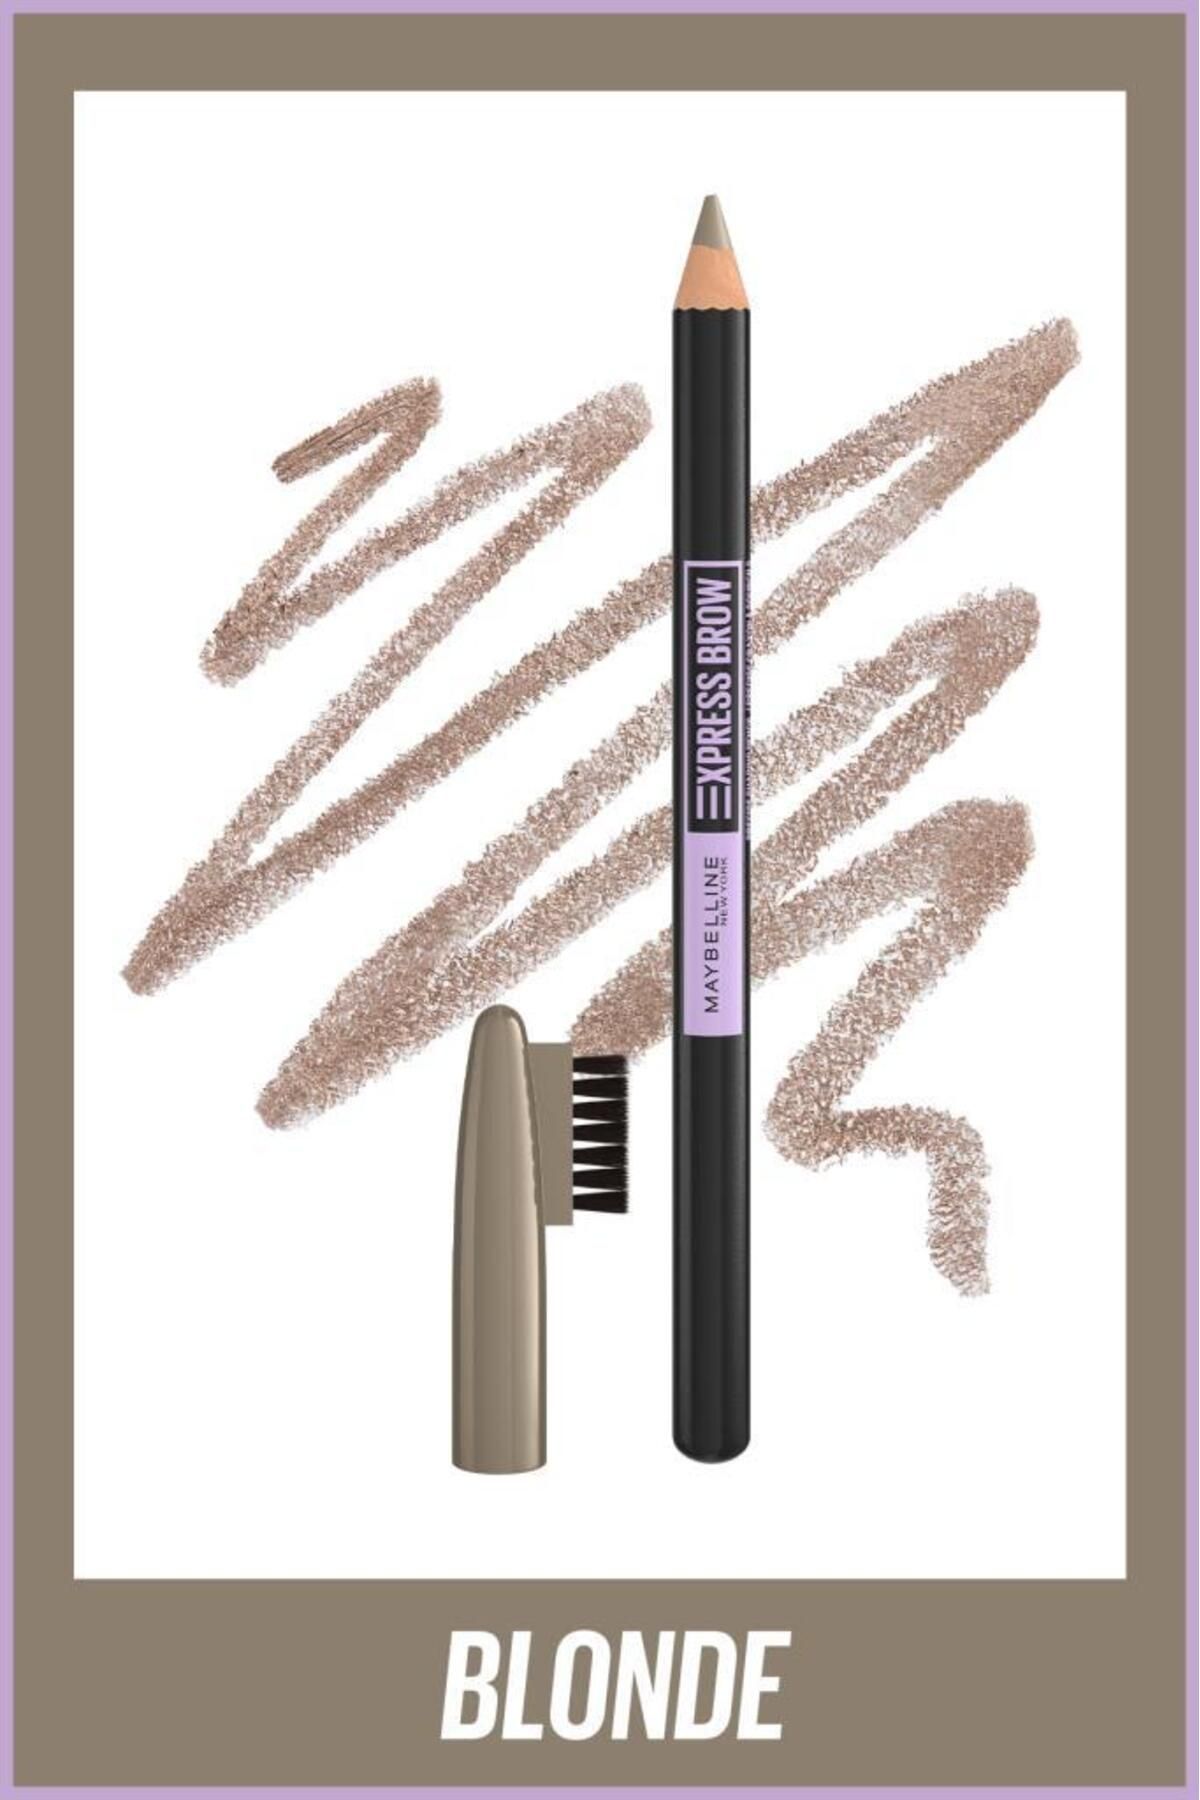 Maybelline New York Express Brow Shaping Pencil - Blonde